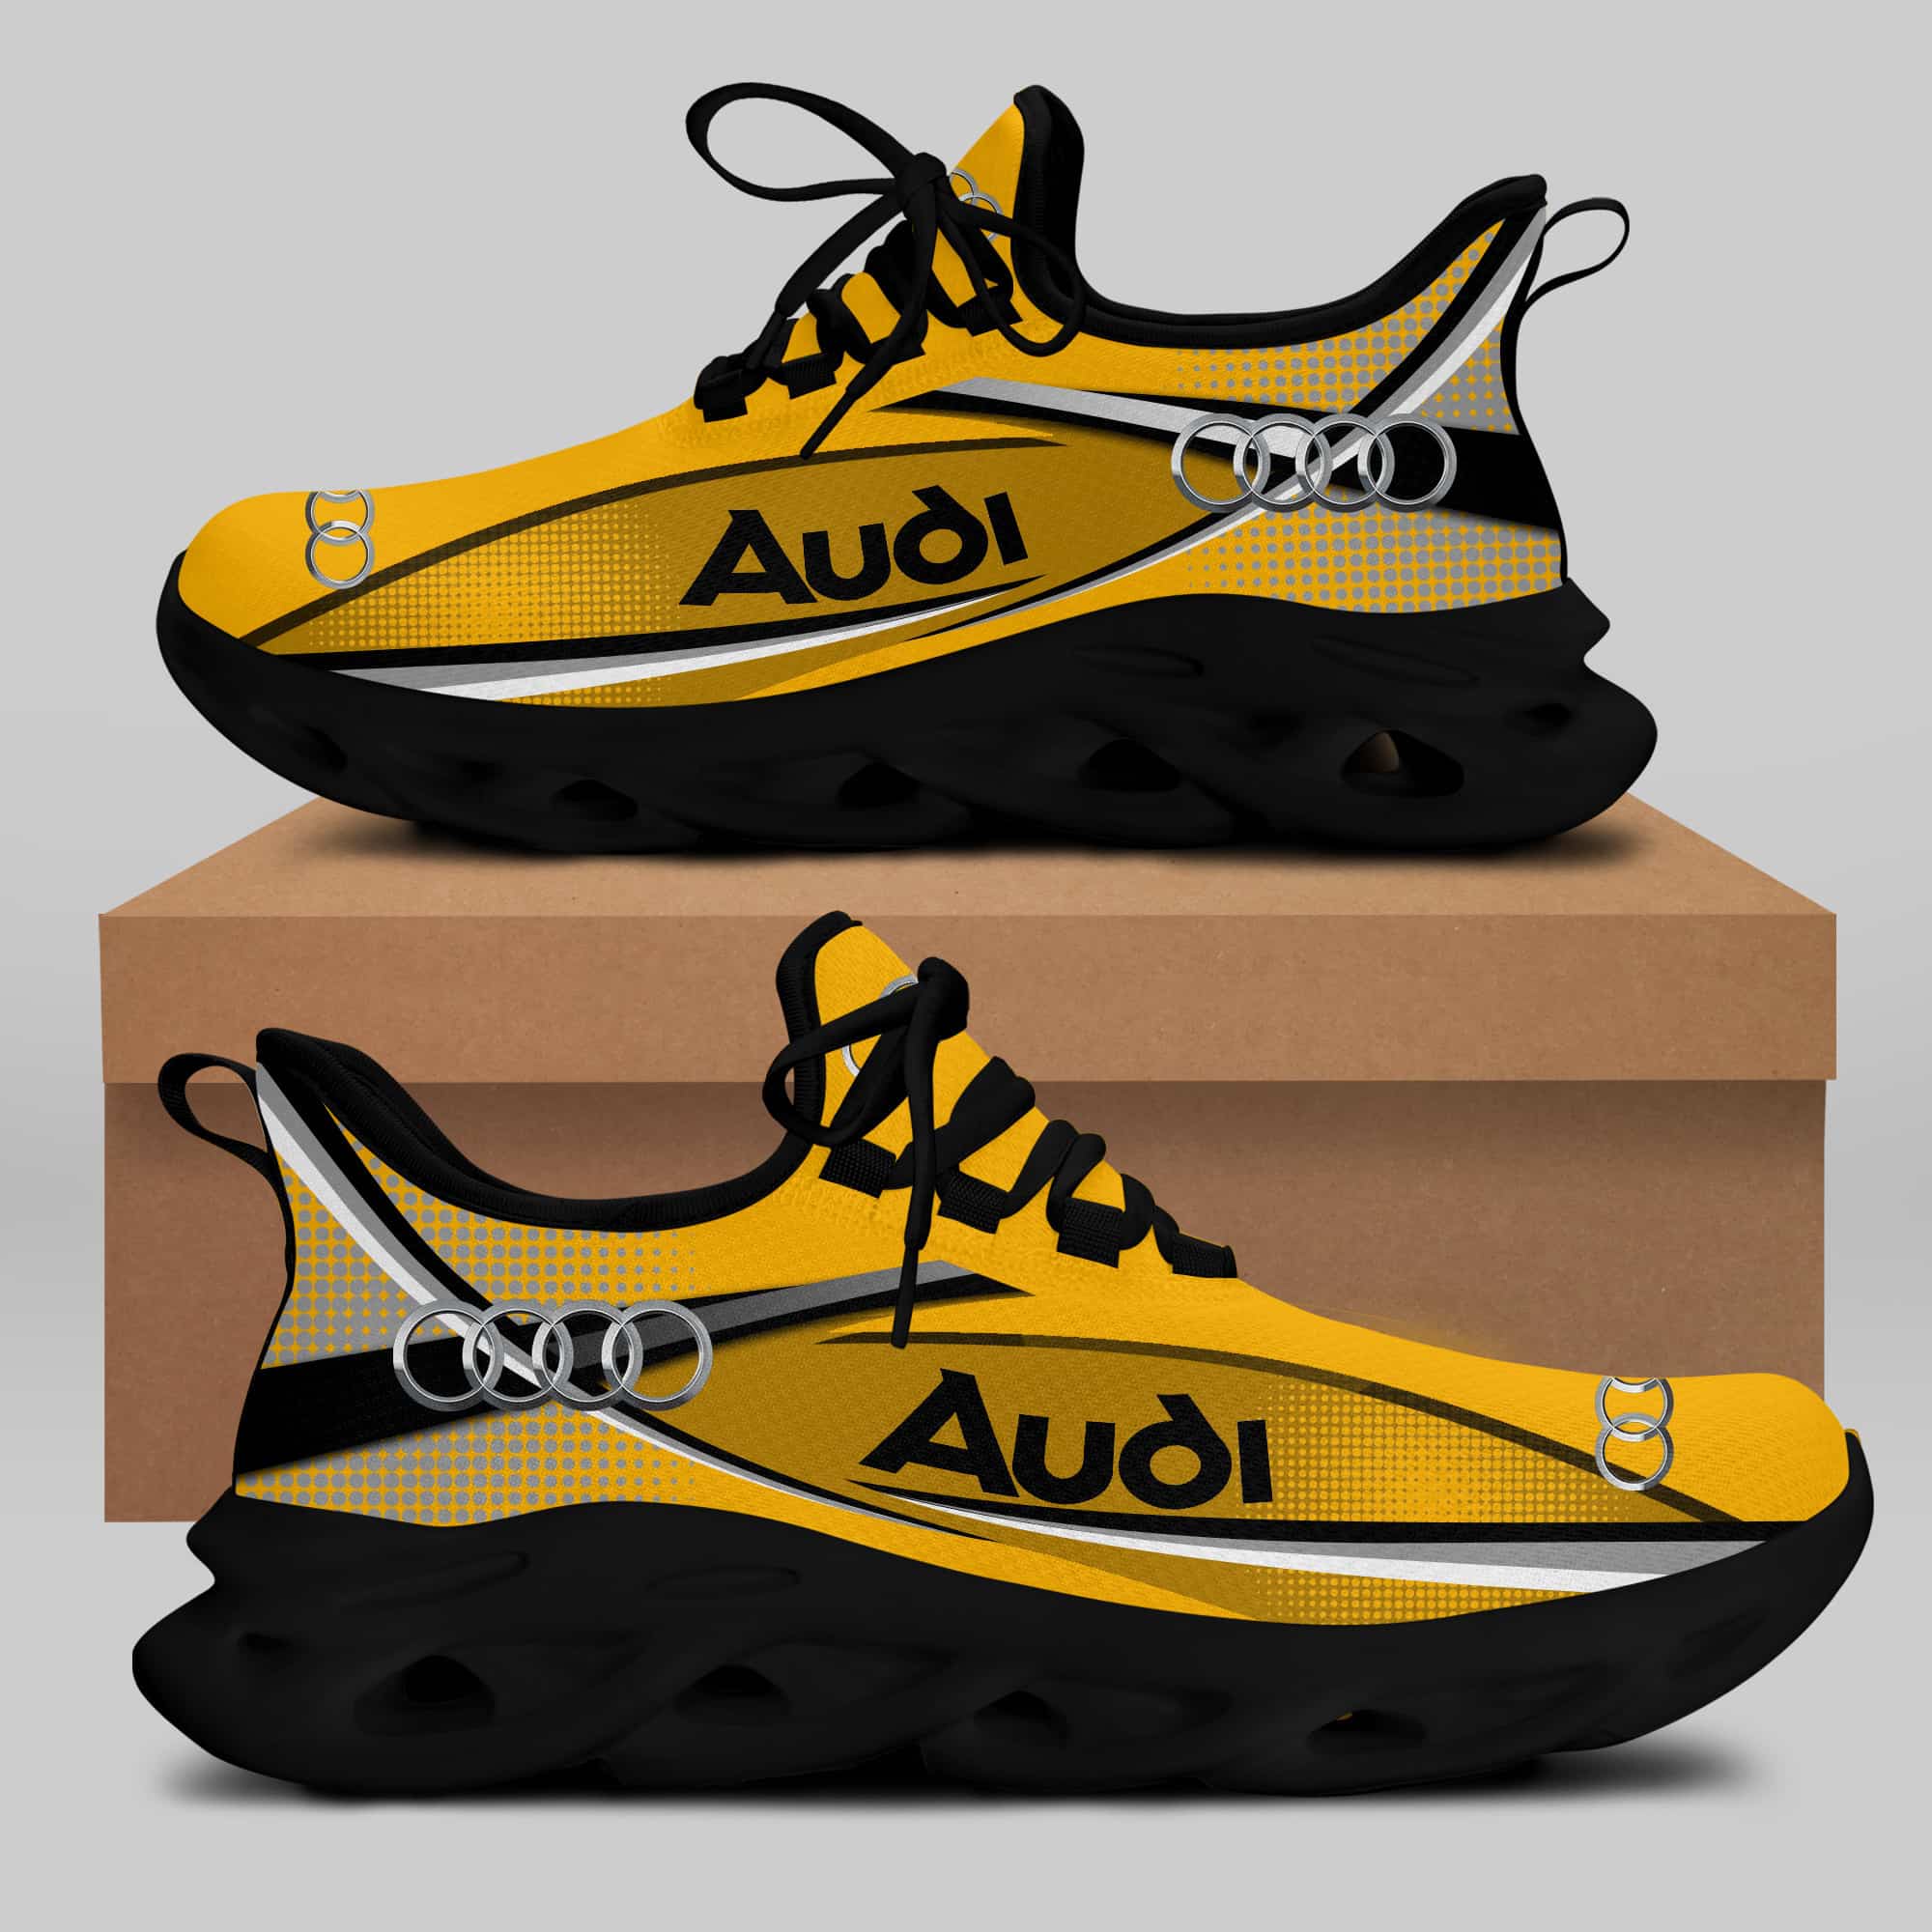 Audi Sport Running Shoes Max Soul Shoes Sneakers Ver 48 1